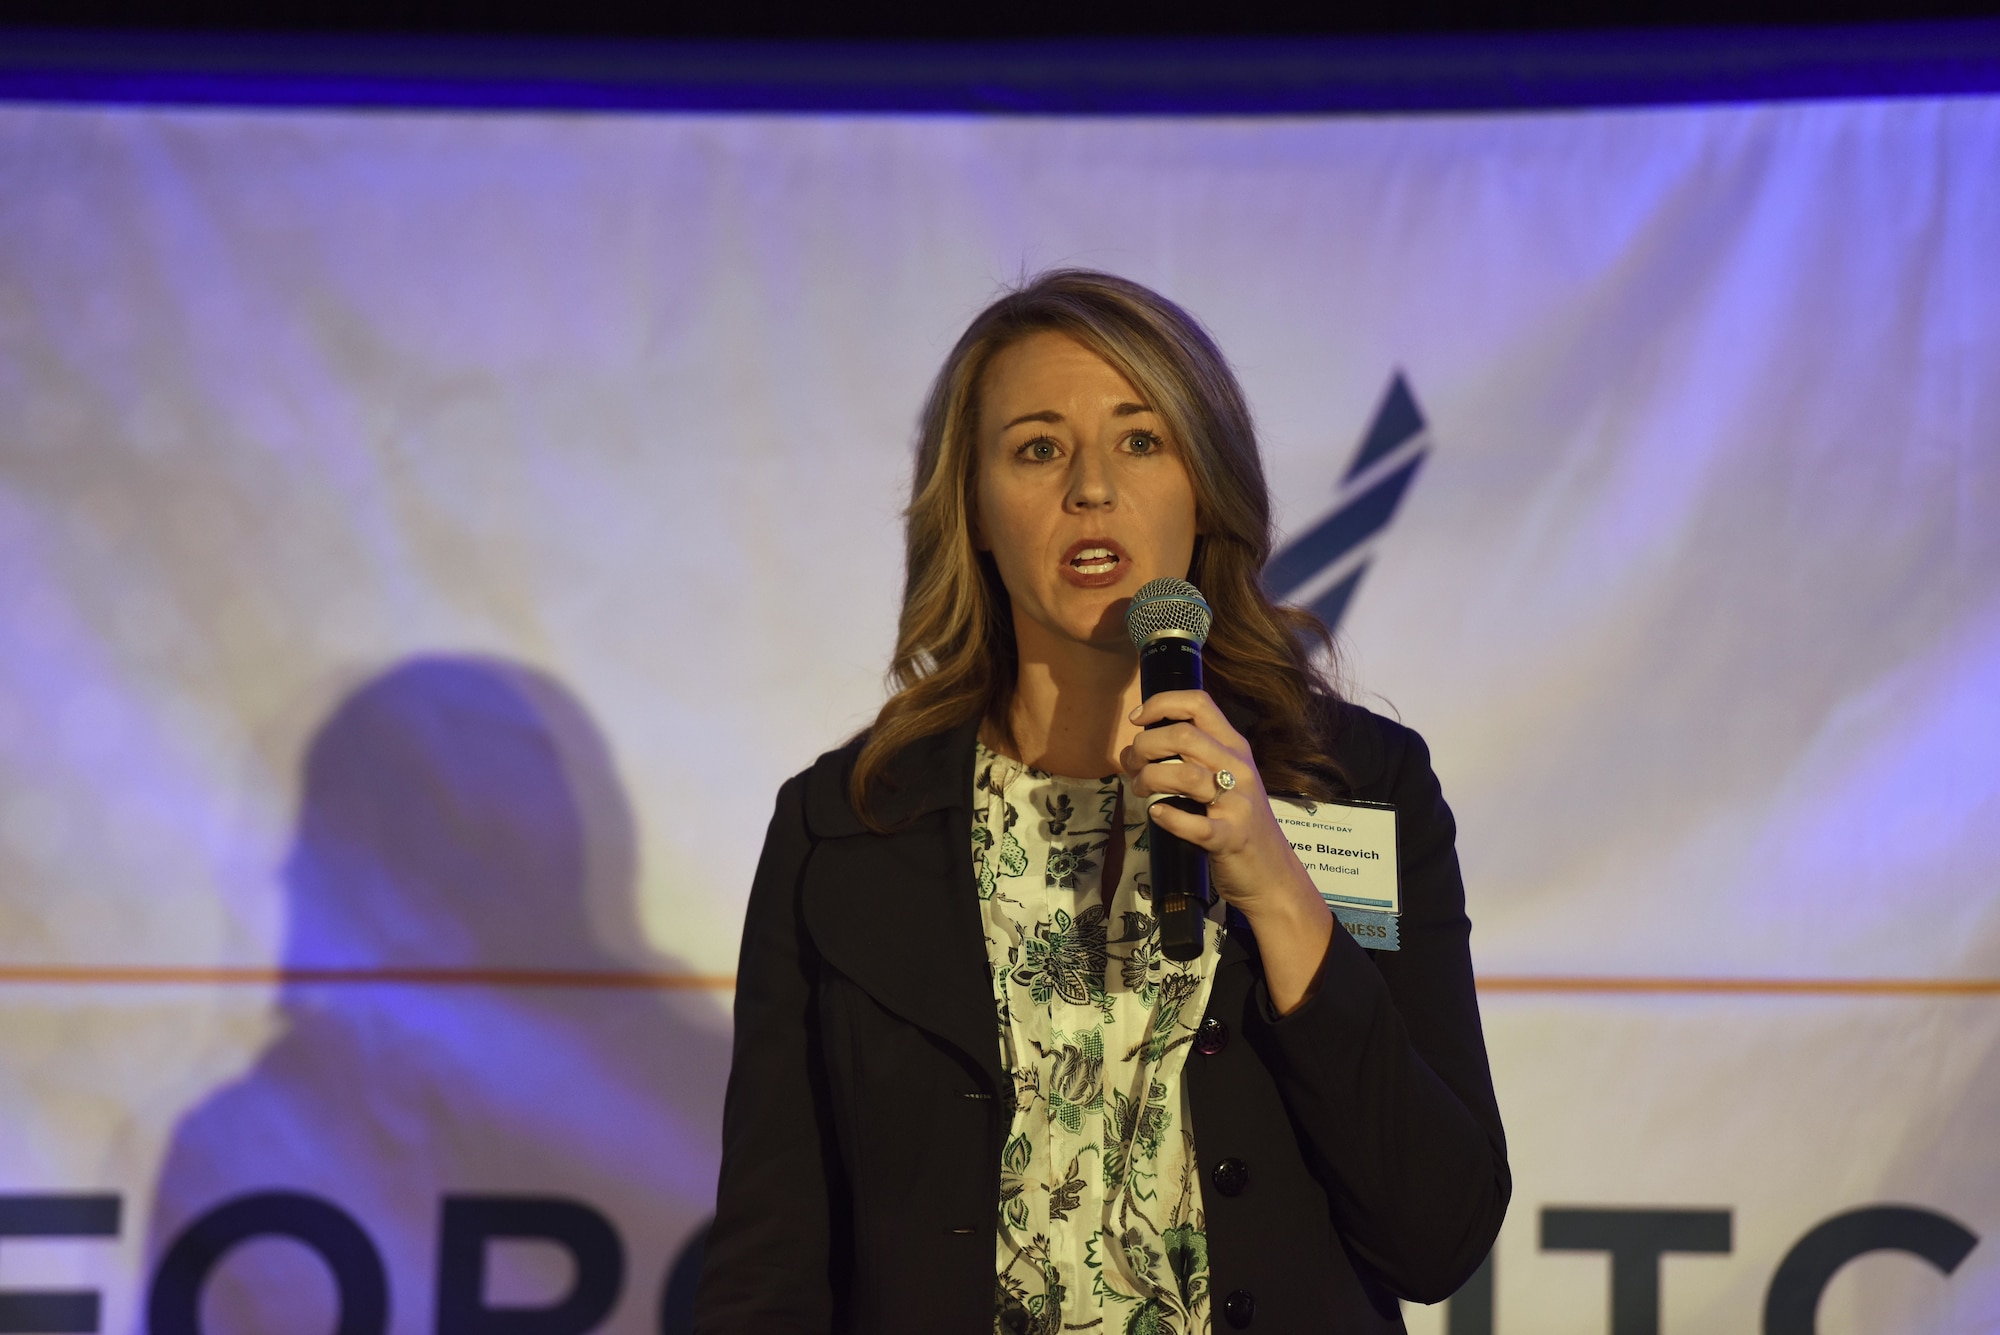 Elyse Blazevich, Securisyn Medical chief operating officer, pitches her product to a crowd of small businesses, venture capitalists and Airmen during the inaugural Air Force Pitch Day in New York, March 7, 2019. Blazevich was awarded a same-day contract with the Air Force. Air Force Pitch Day is designed as a fast-track program to put companies on one-page contracts and same-day awards with the swipe of a government credit card. The Air Force is partnering with small businesses to help further national security in air, space and cyberspace. (U.S. Air Force photo by Tech Sgt. Anthony Nelson Jr.)